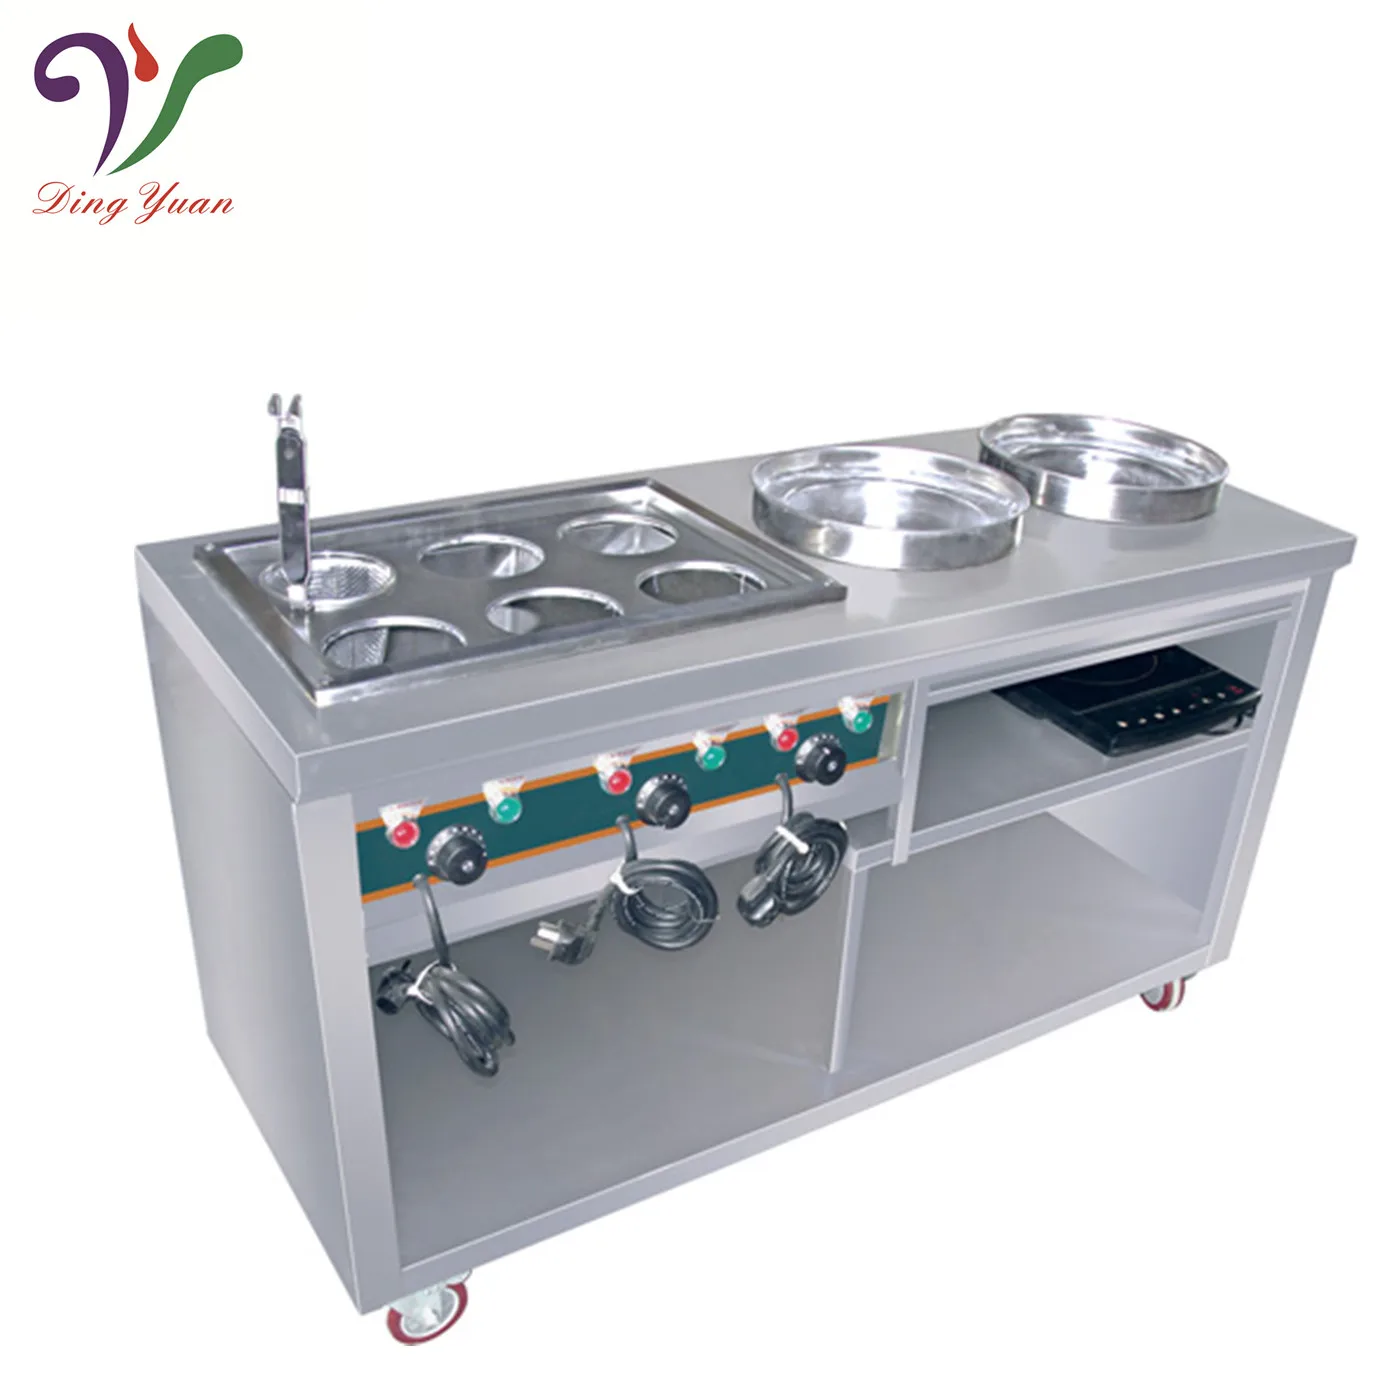 

Factory Price Stainless Steel Pasta Boiler Machine, Gas or Electric Noodle Cooking Machine Pasta Cooker